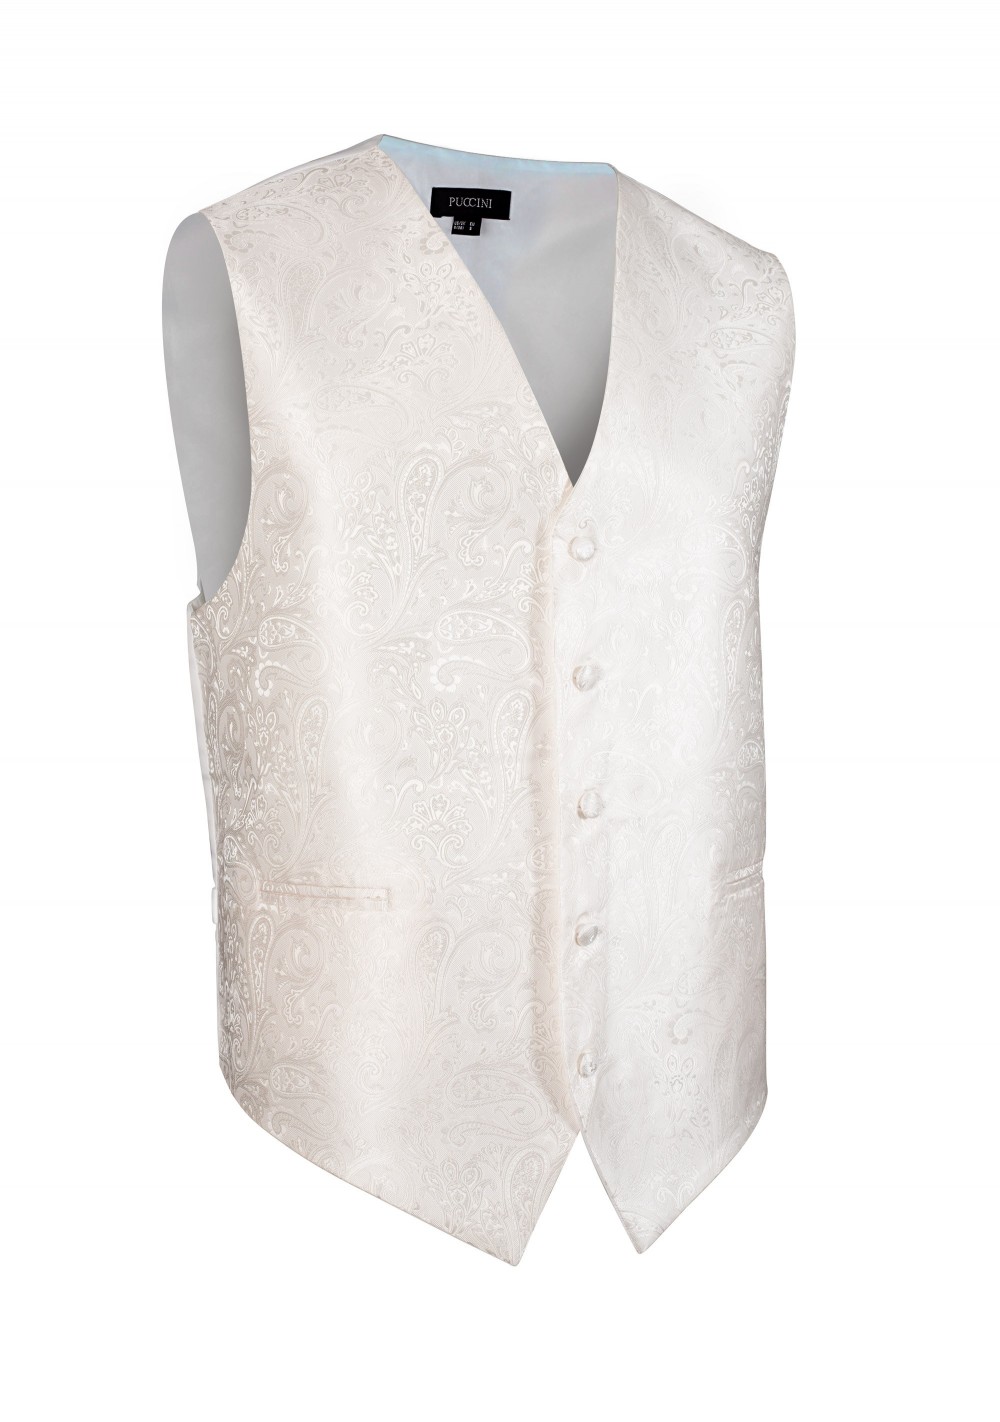 Ivory Off-White Wedding Vest with Paisley Textured Design